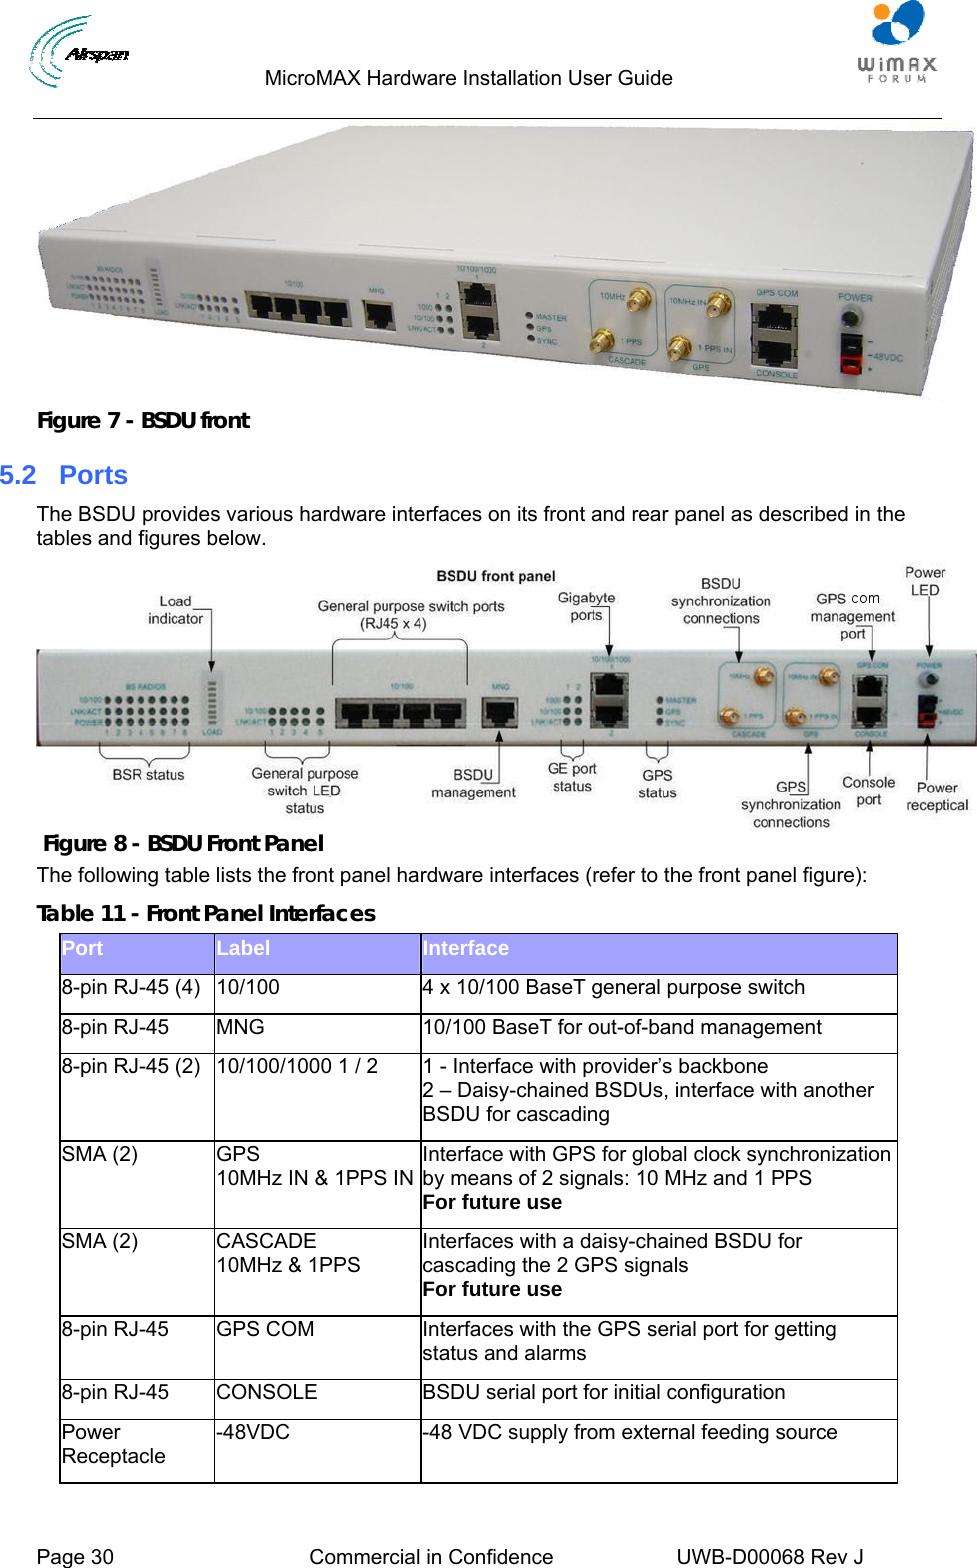                                  MicroMAX Hardware Installation User Guide     Page 30  Commercial in Confidence  UWB-D00068 Rev J    Figure 7 - BSDU front 5.2  Ports The BSDU provides various hardware interfaces on its front and rear panel as described in the tables and figures below.  Figure 8 - BSDU Front Panel The following table lists the front panel hardware interfaces (refer to the front panel figure): Table 11 - Front Panel Interfaces Port  Label  Interface 8-pin RJ-45 (4)  10/100  4 x 10/100 BaseT general purpose switch 8-pin RJ-45  MNG  10/100 BaseT for out-of-band management 8-pin RJ-45 (2)  10/100/1000 1 / 2  1 - Interface with provider’s backbone  2 – Daisy-chained BSDUs, interface with another BSDU for cascading SMA (2)  GPS 10MHz IN &amp; 1PPS INInterface with GPS for global clock synchronization by means of 2 signals: 10 MHz and 1 PPS For future use SMA (2)  CASCADE 10MHz &amp; 1PPS Interfaces with a daisy-chained BSDU for cascading the 2 GPS signals For future use 8-pin RJ-45  GPS COM  Interfaces with the GPS serial port for getting status and alarms 8-pin RJ-45  CONSOLE  BSDU serial port for initial configuration Power Receptacle -48VDC  -48 VDC supply from external feeding source  